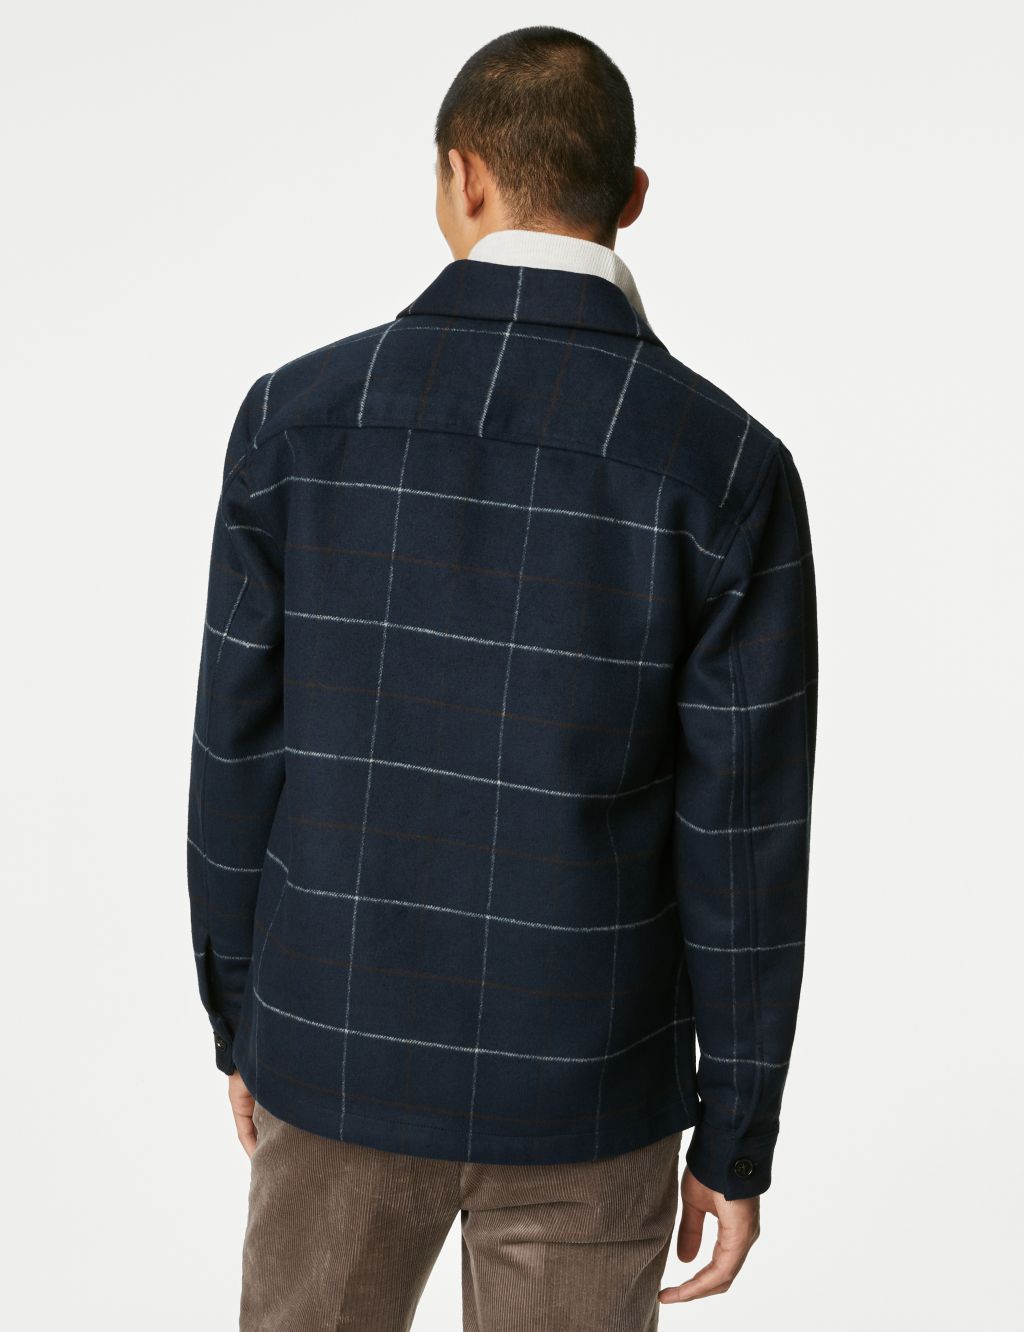 Double Faced Check Overshirt image 5